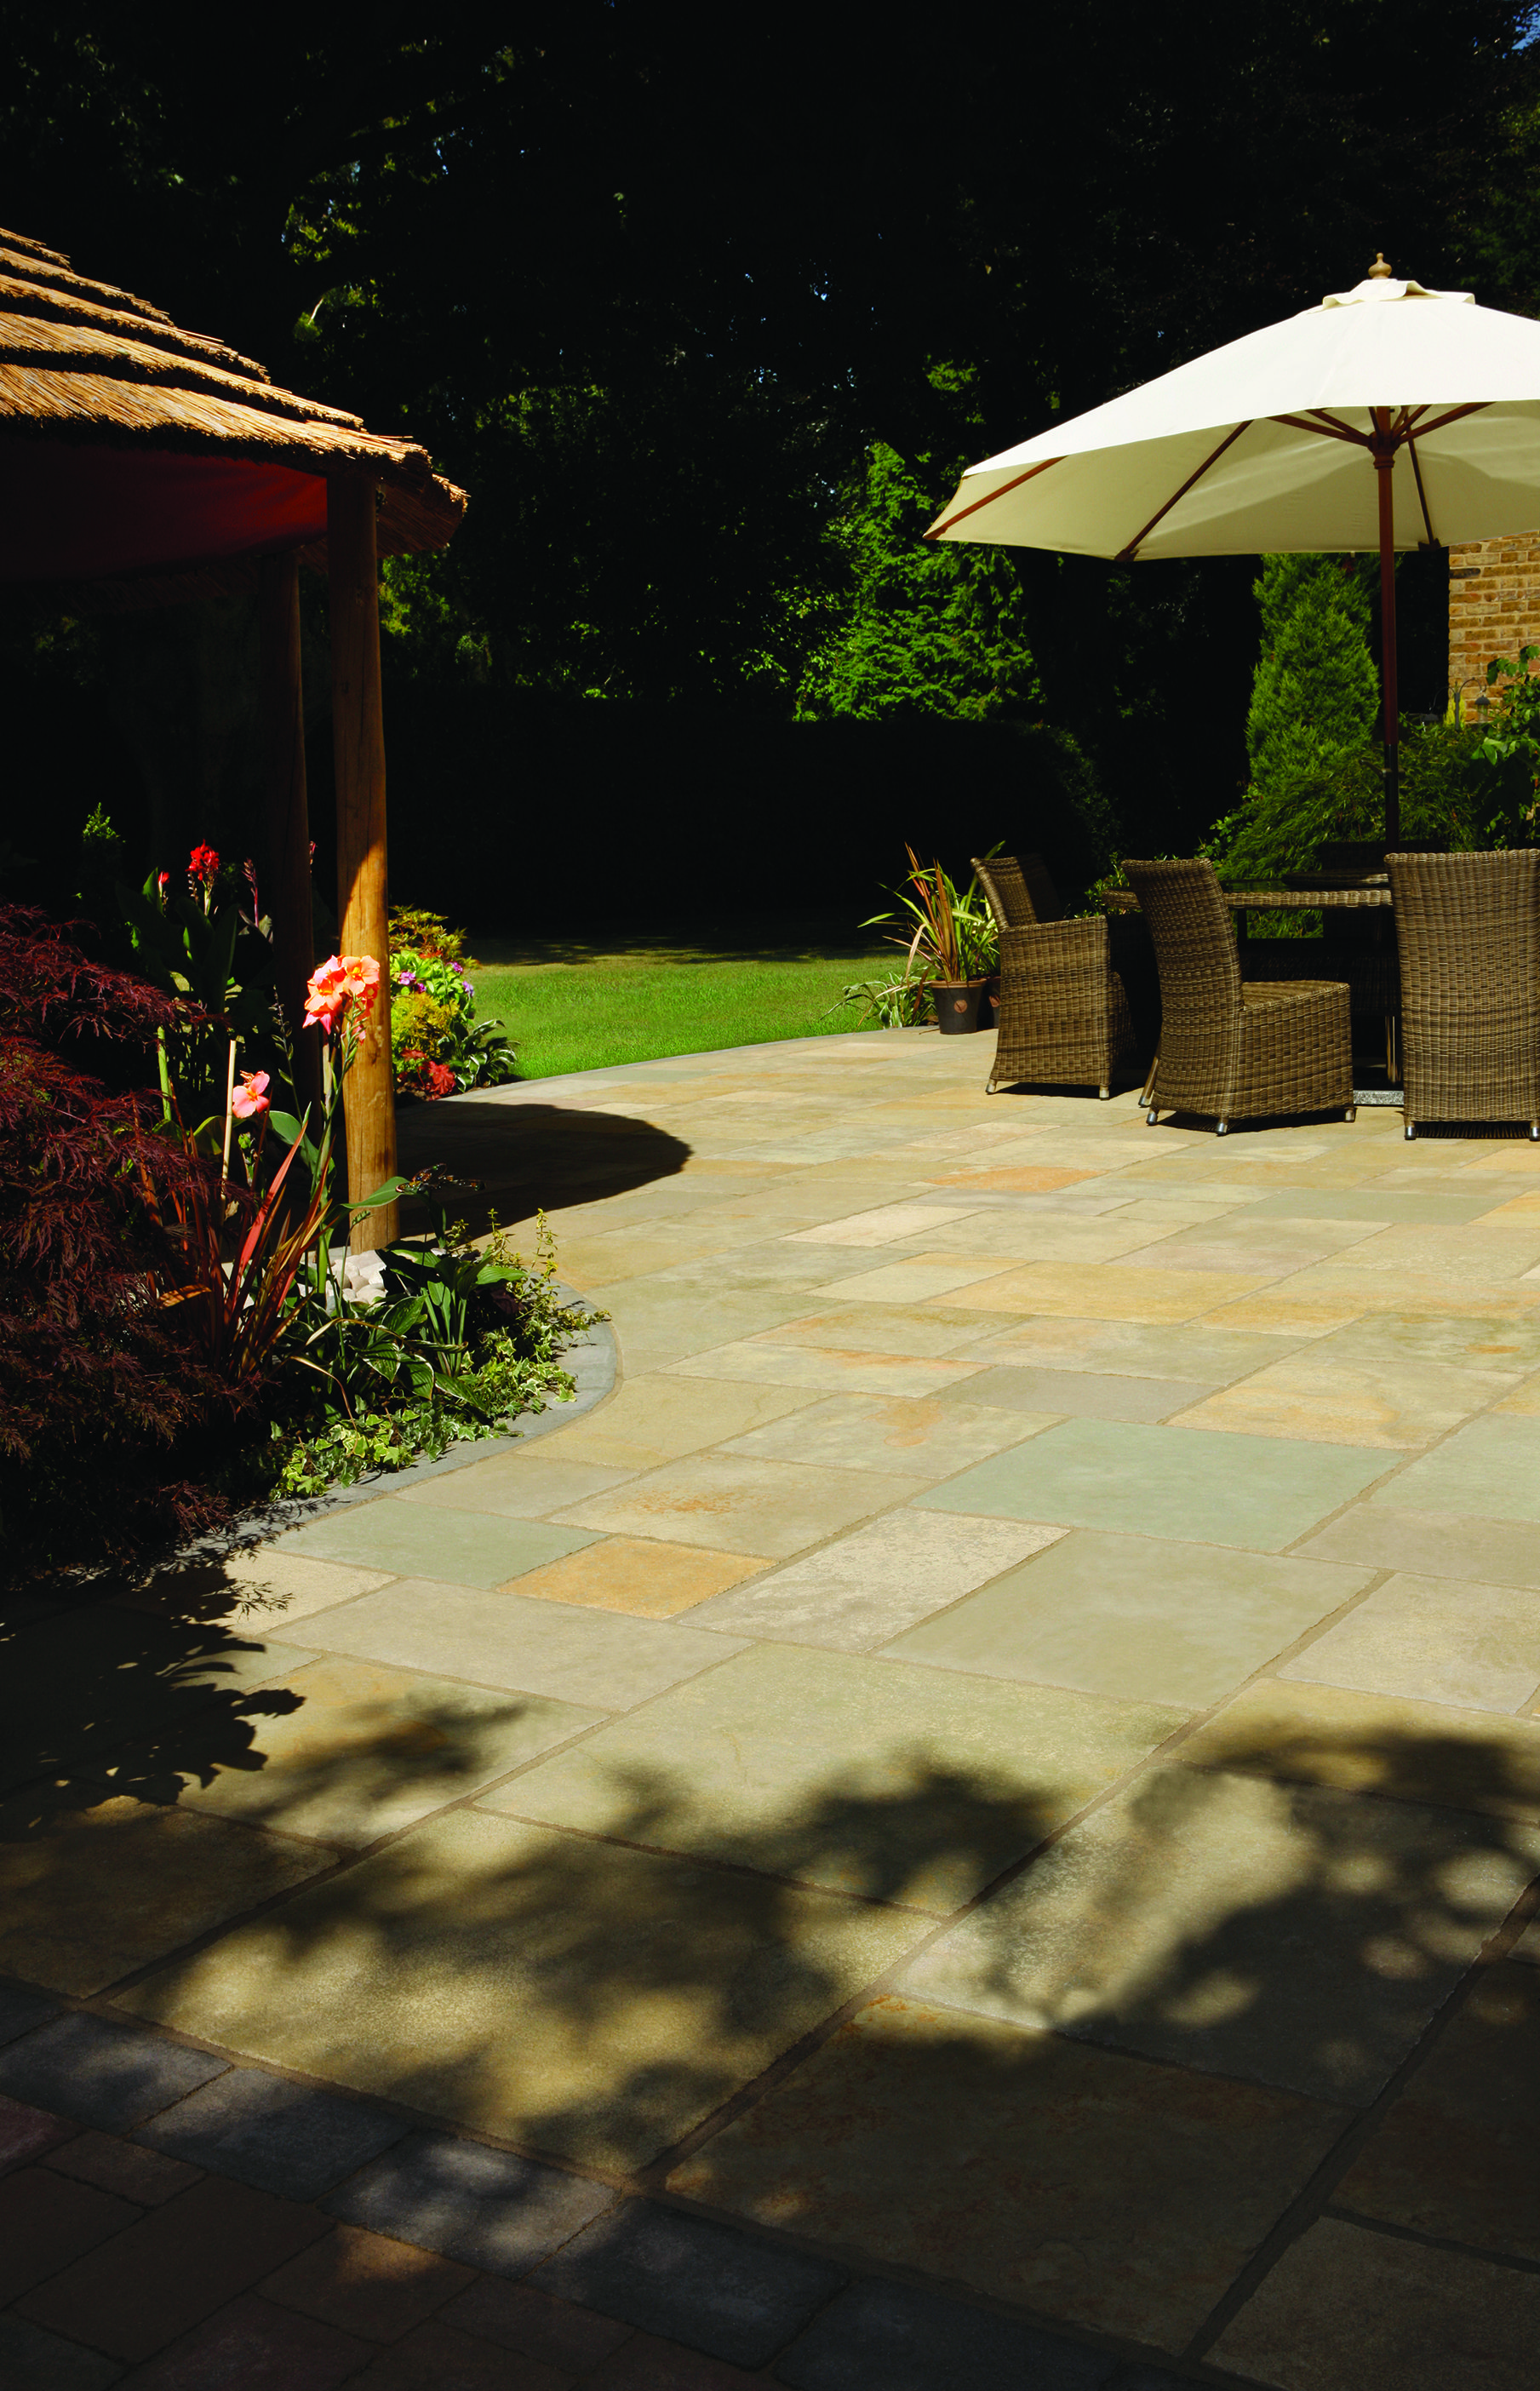 What is the best paving for patios?